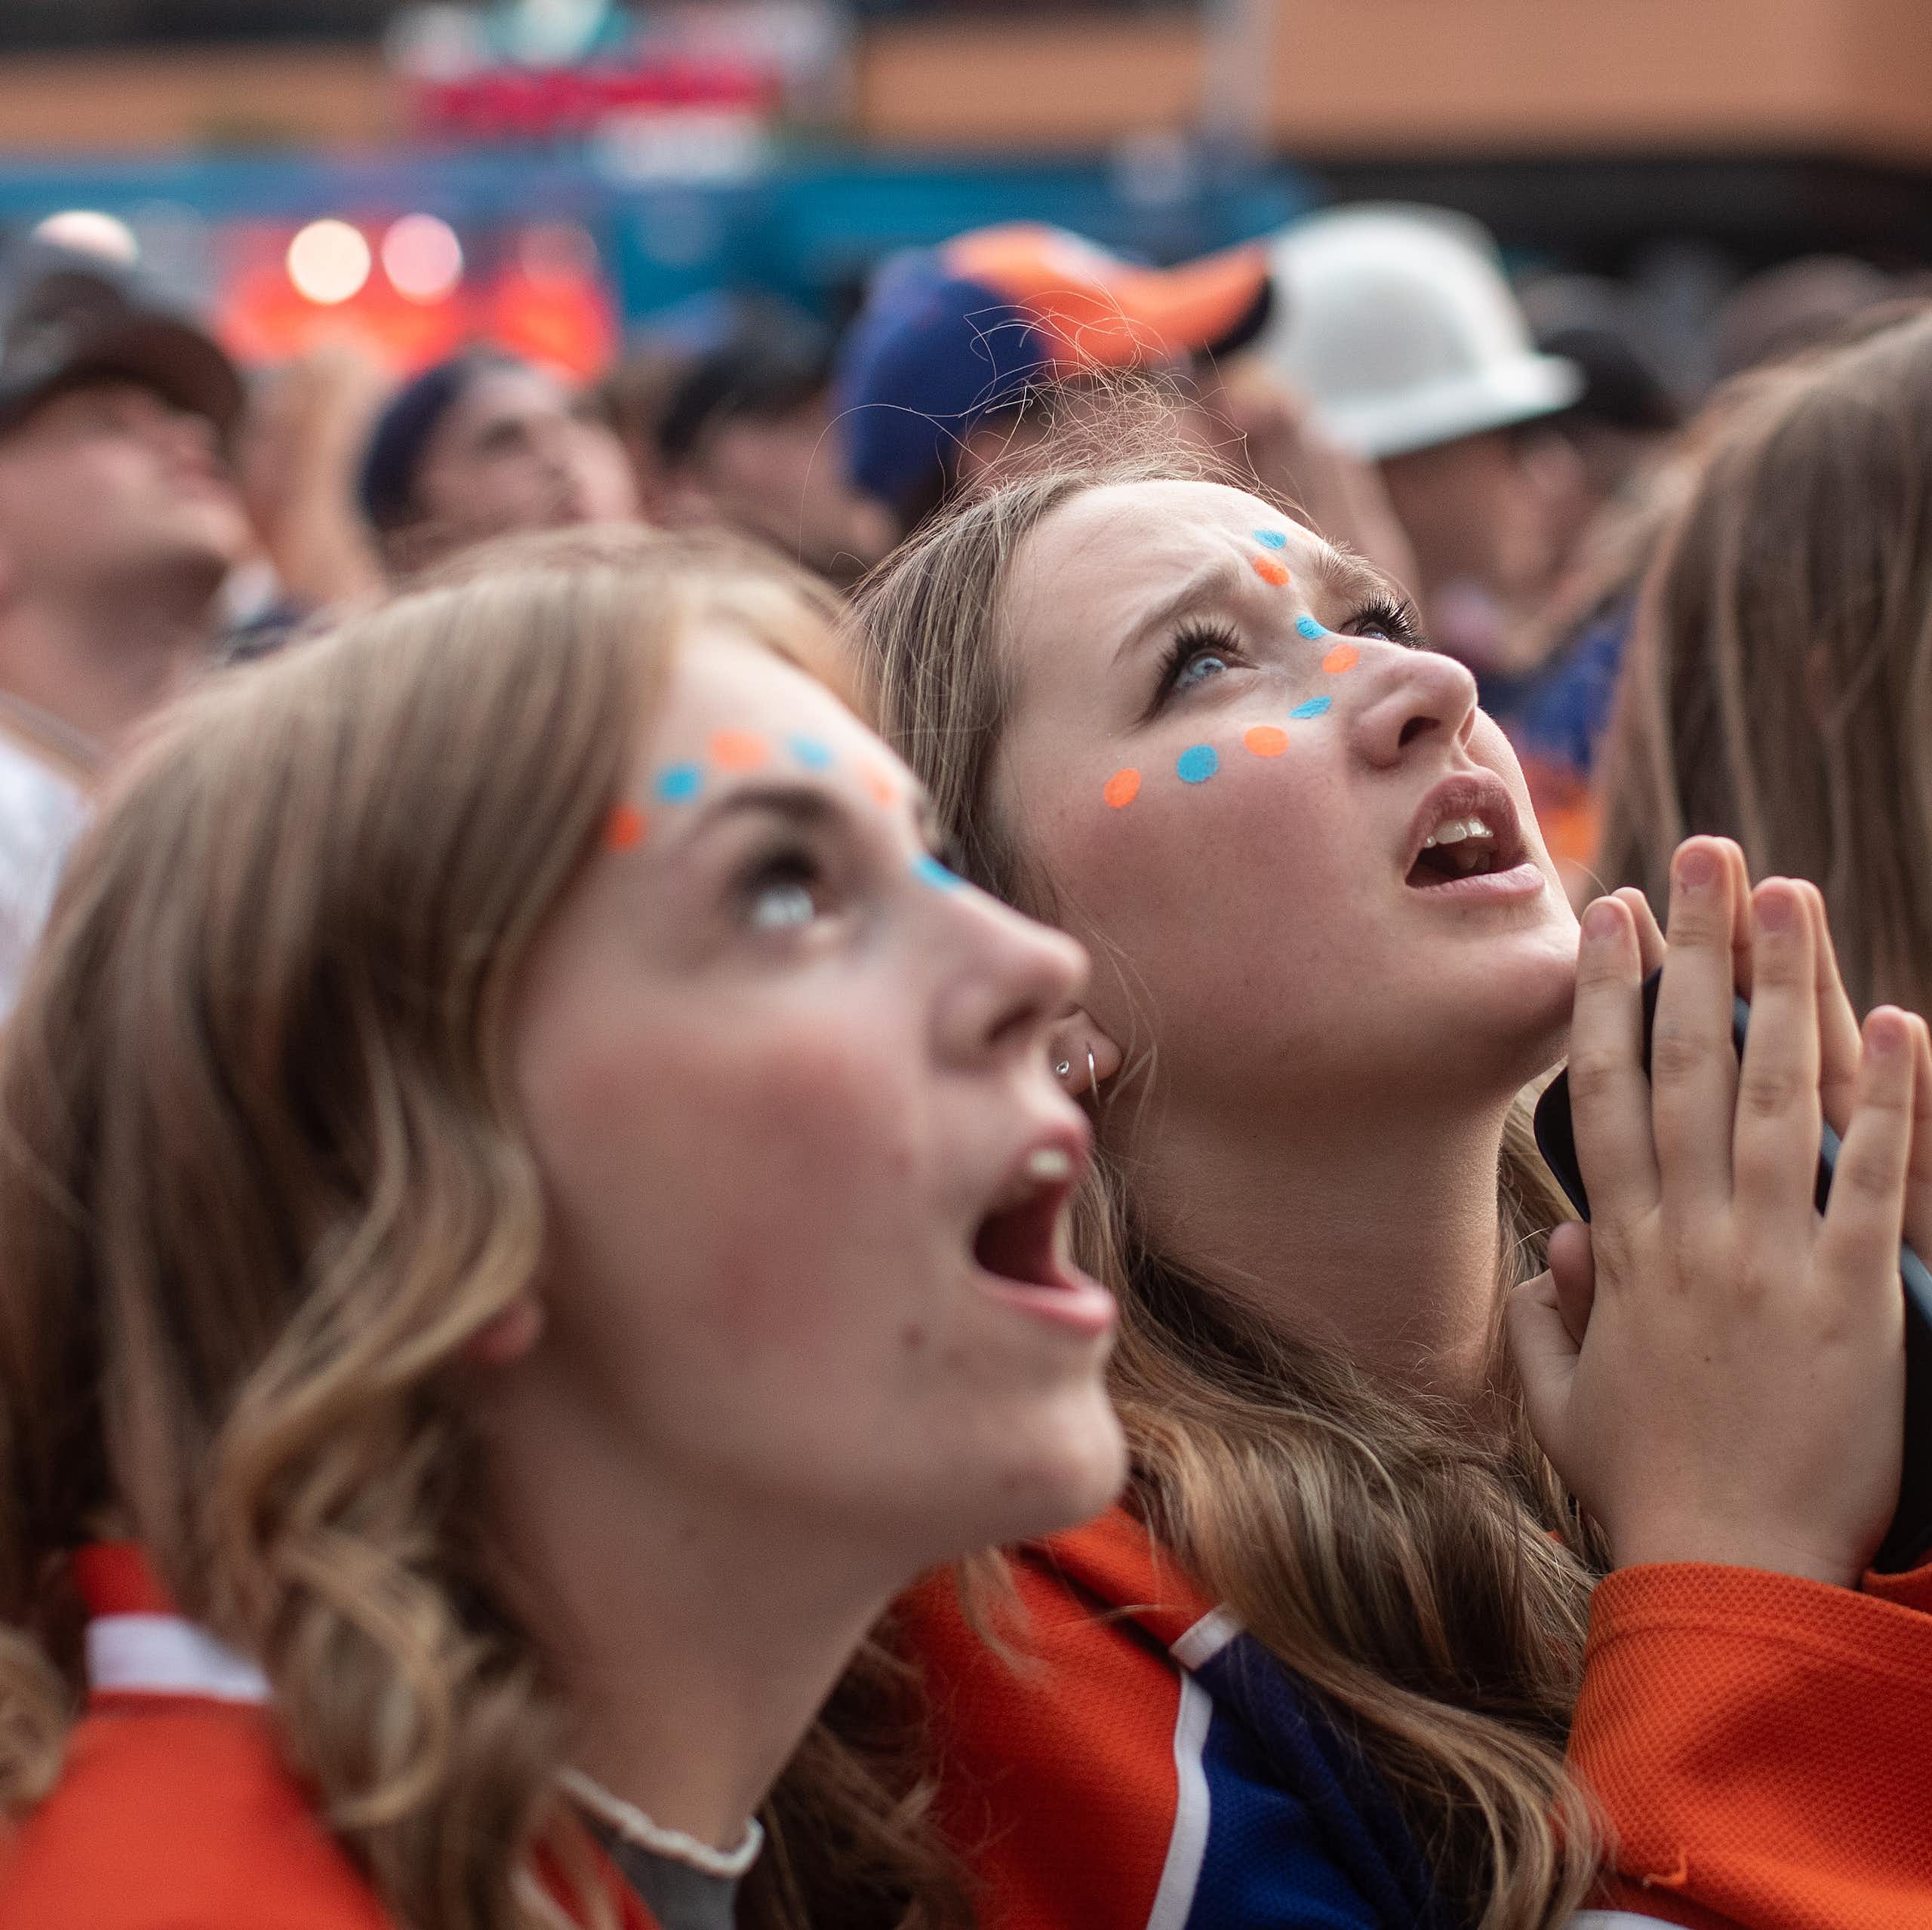 Three women in Edmonton jerseys look up, with one appearing to be praying.